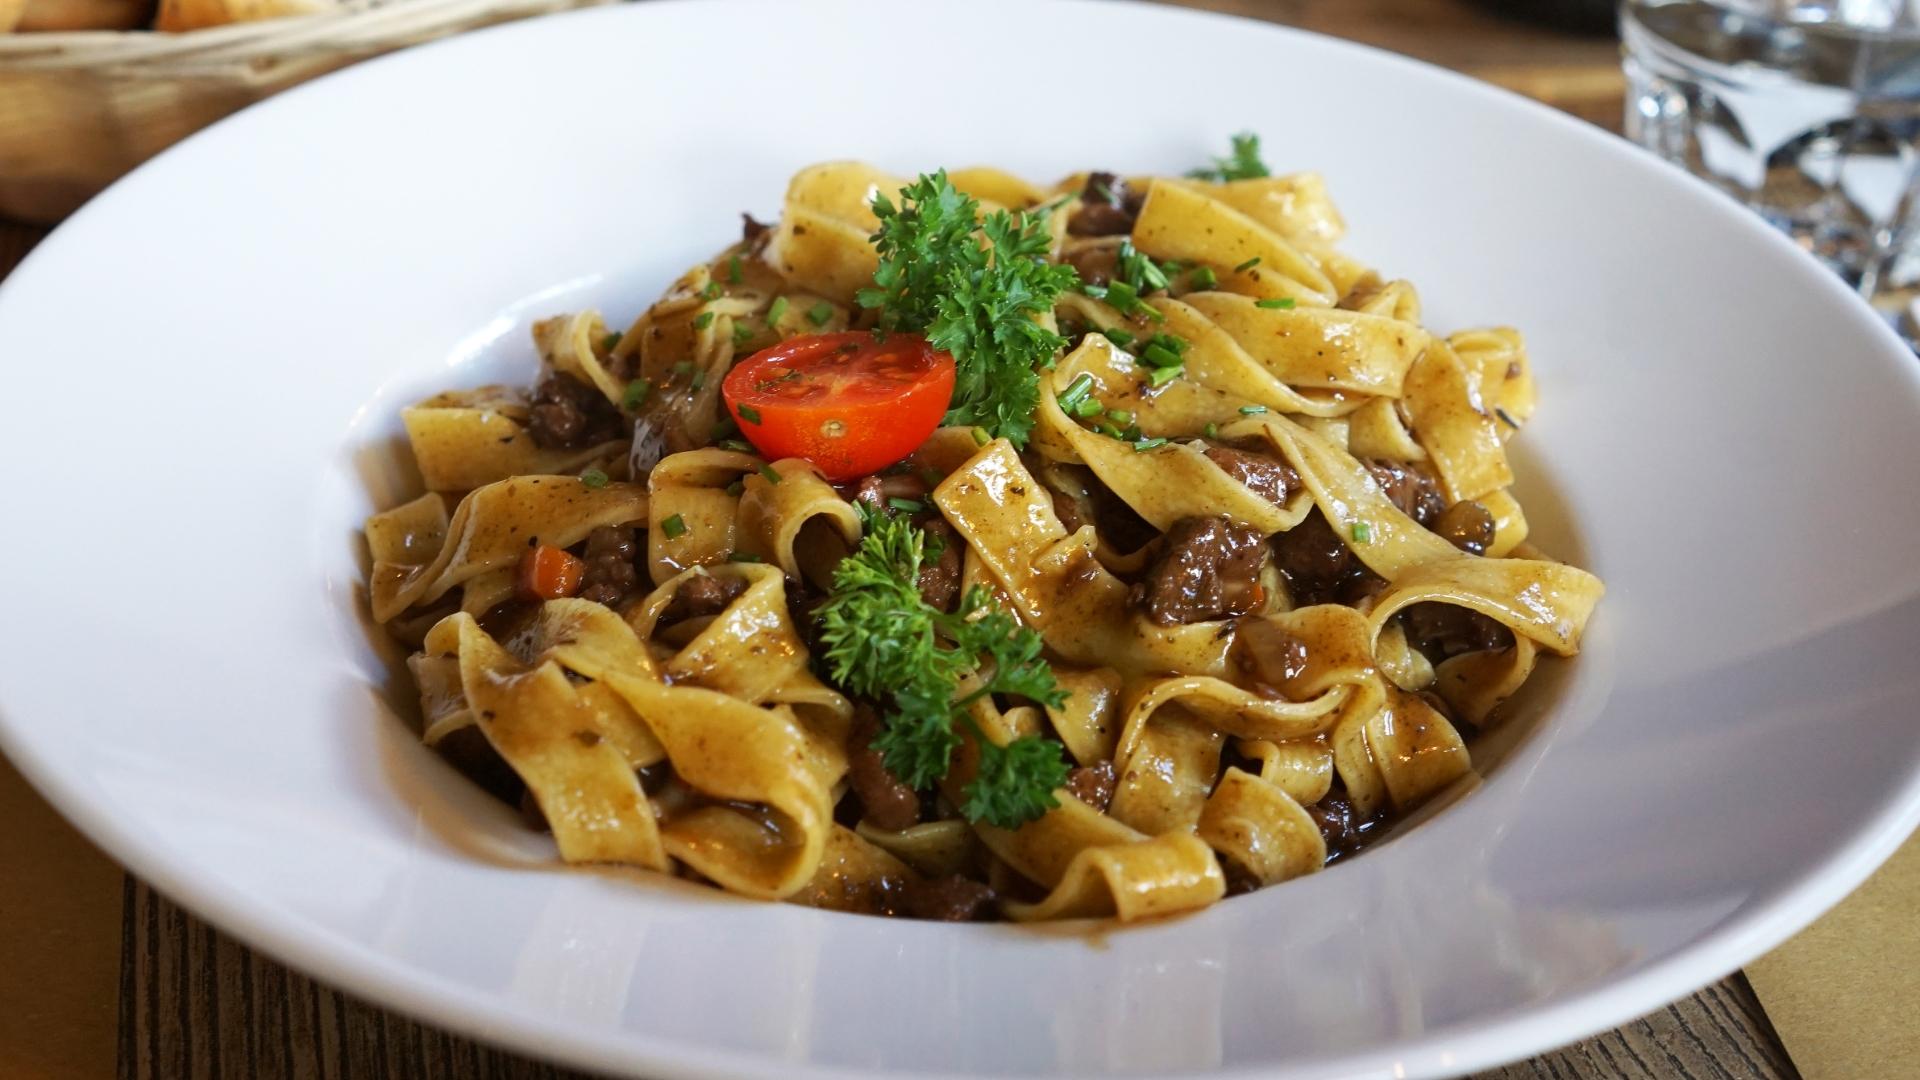 Tagliatelle with meat sauce, garnished with parsley and cherry tomato.